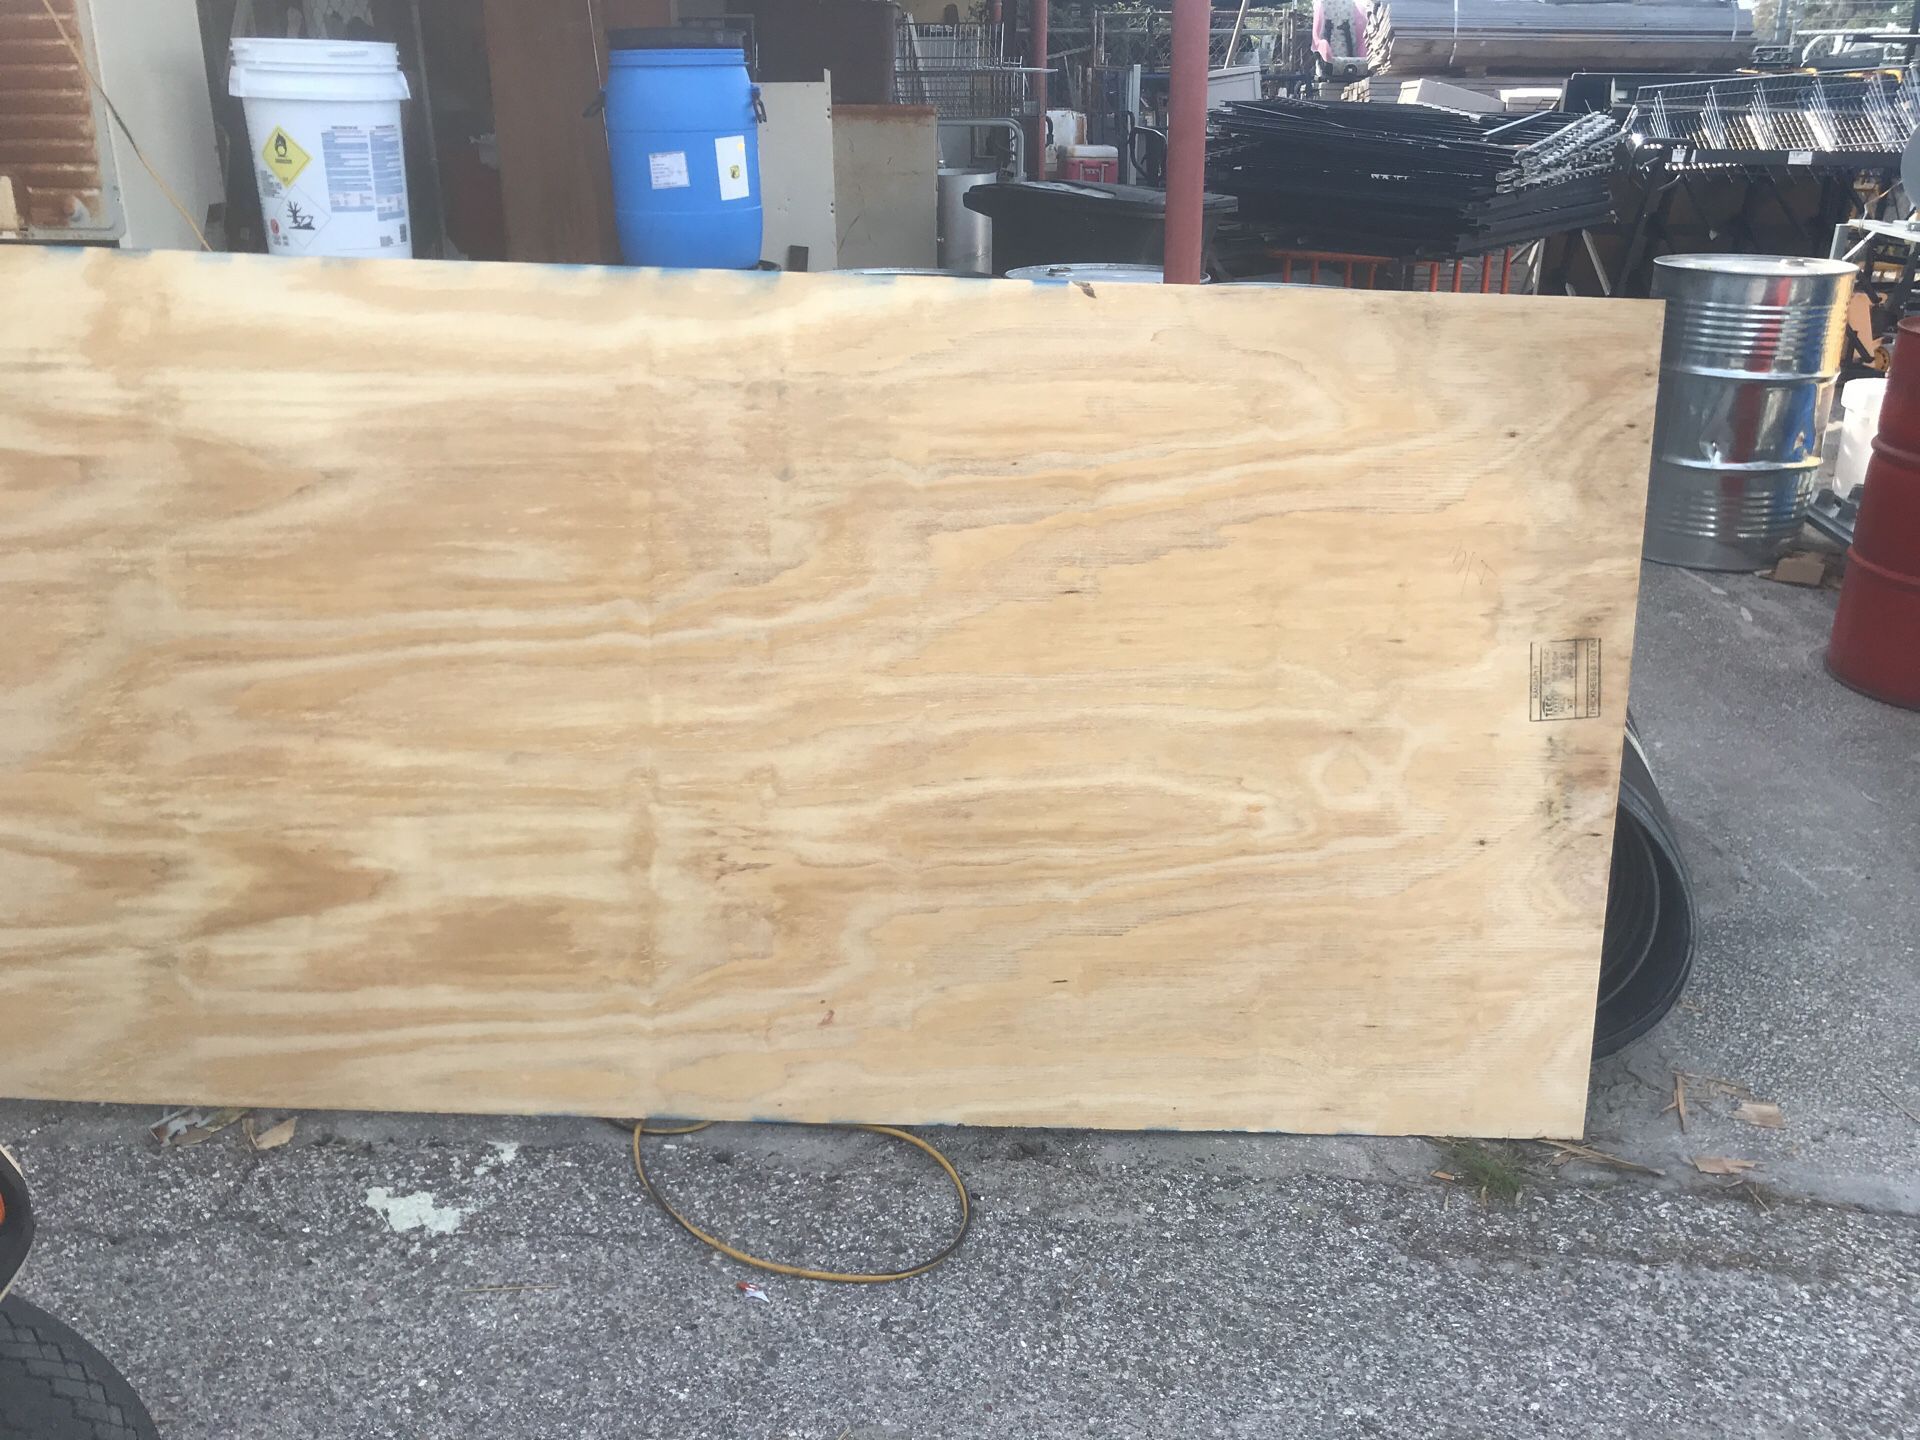 Three-quarter inch plywood new 600 sheets available $30 a sheet